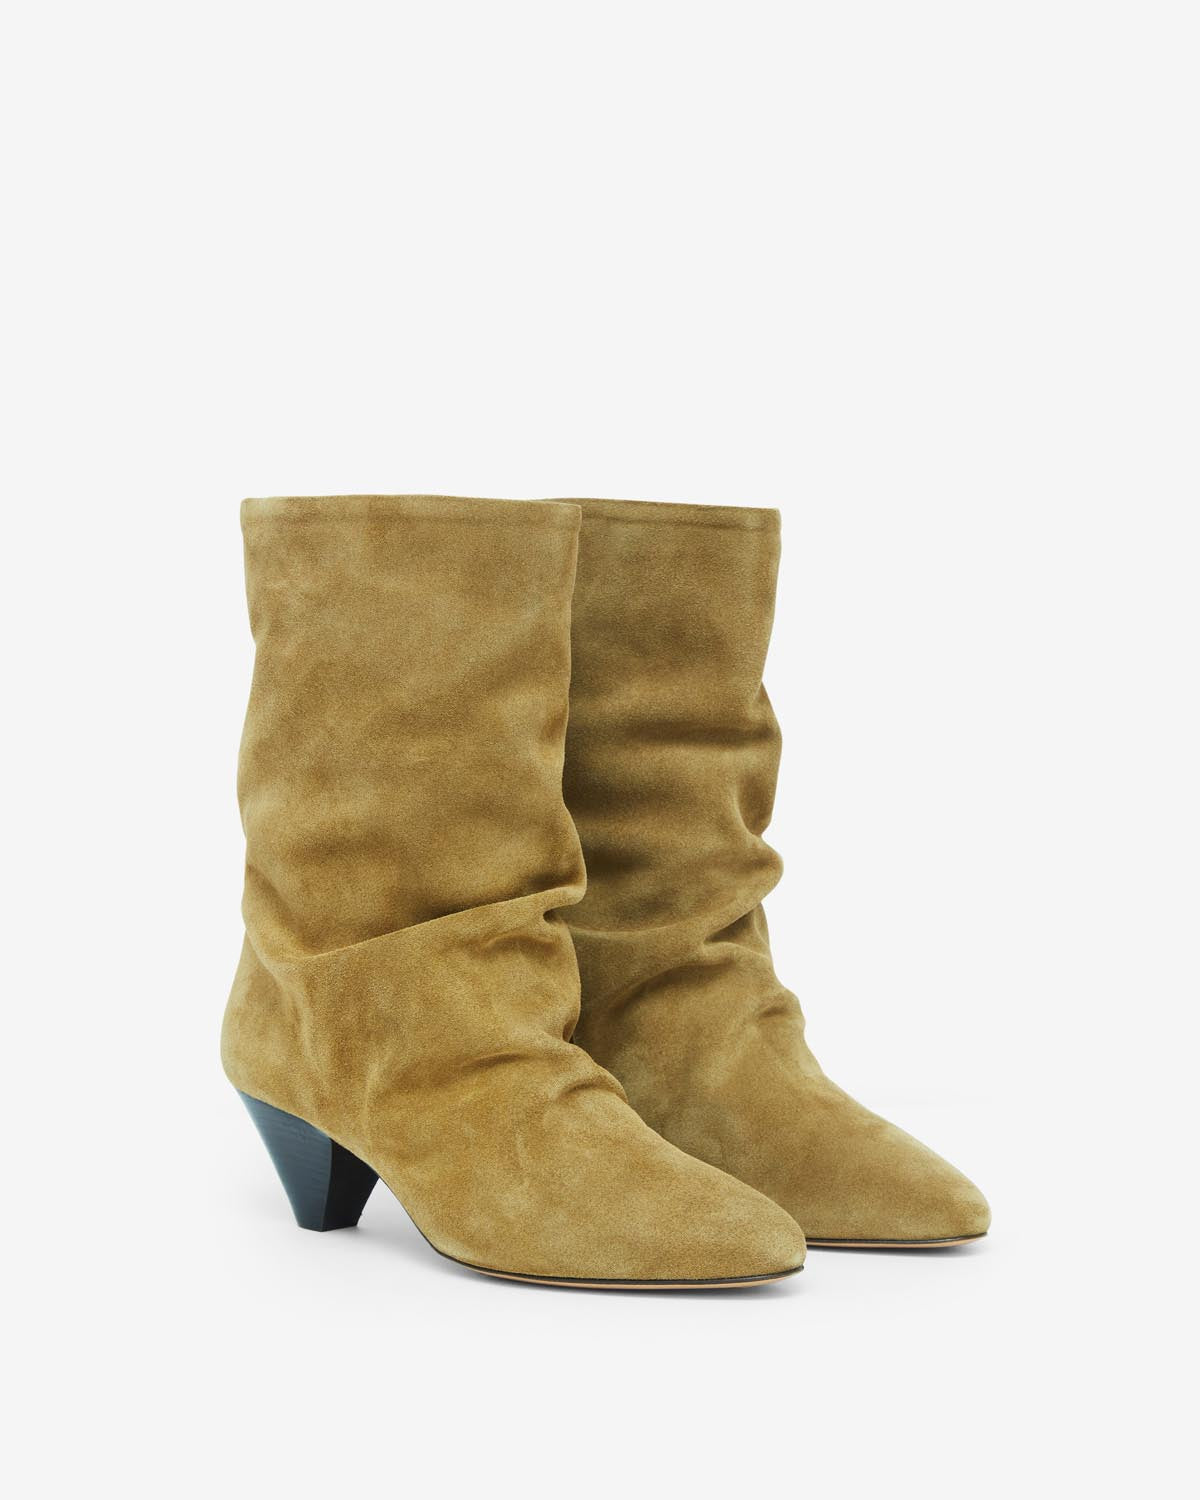 Boots reachi Woman Taupe 5